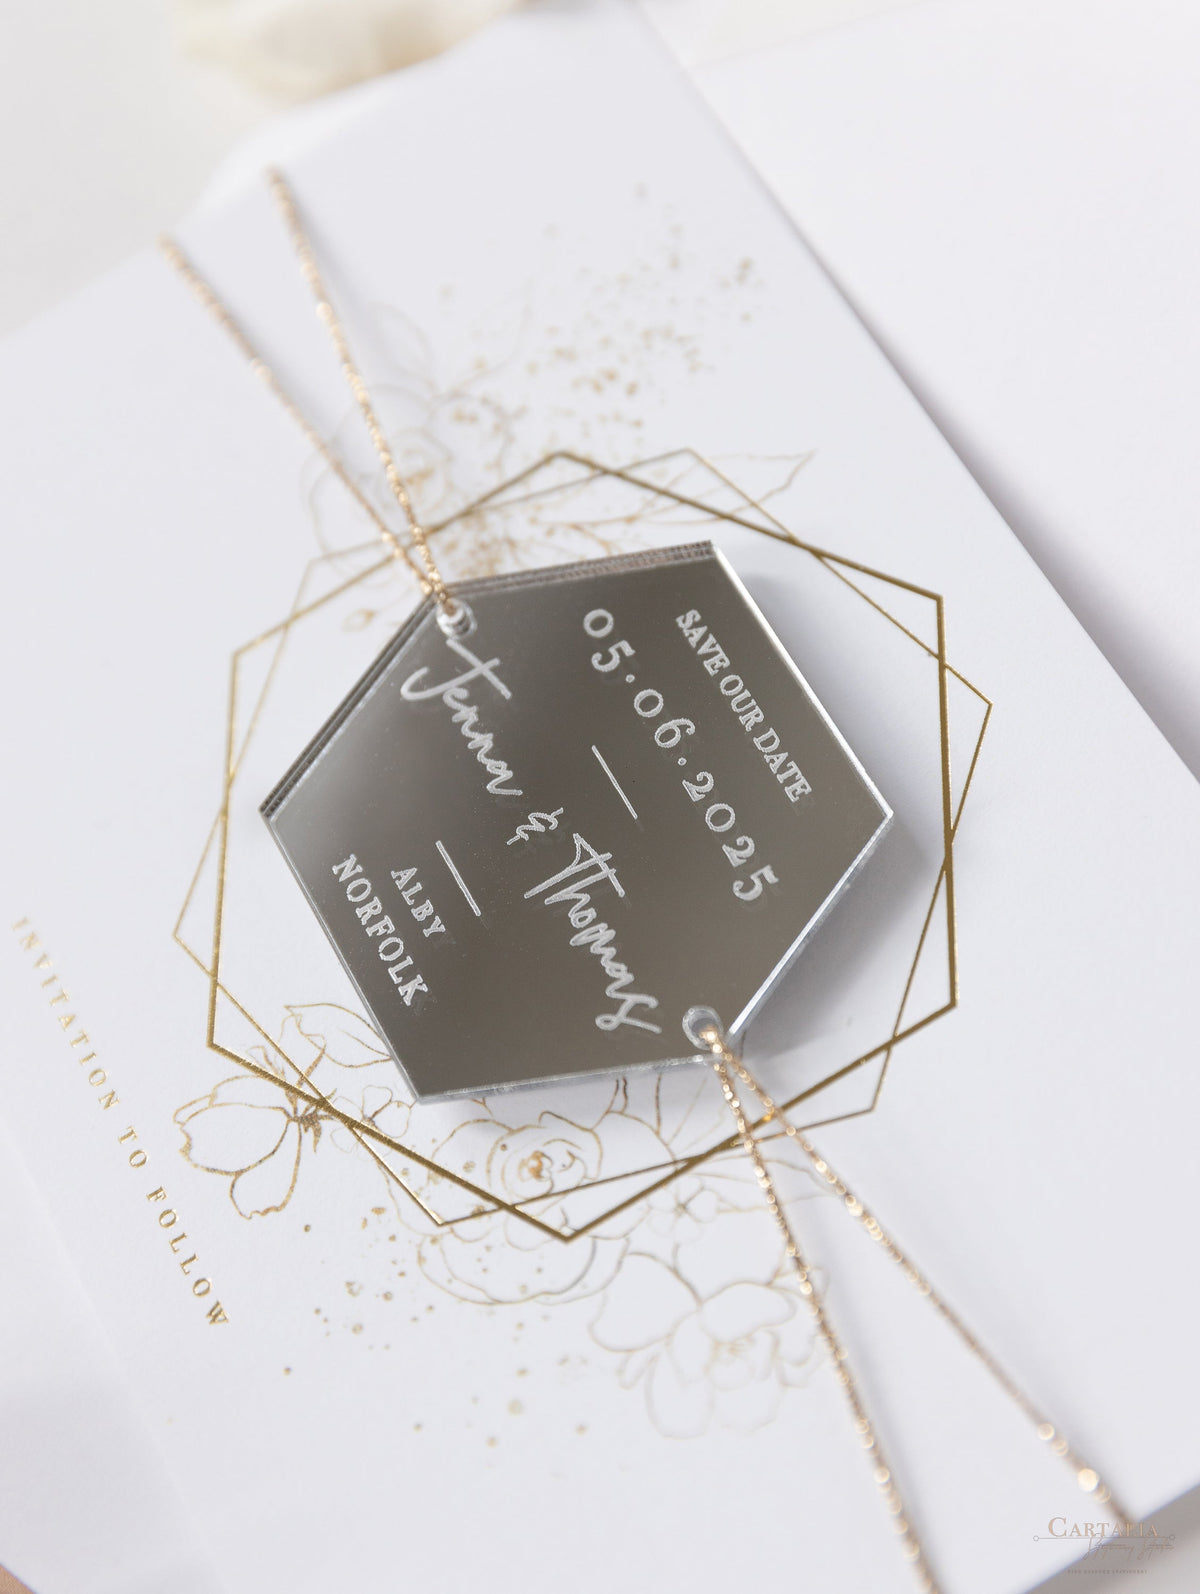 Hexagonal Mirror Magnet Personalised Engraving with Rose Gold Foil Save the Date Card